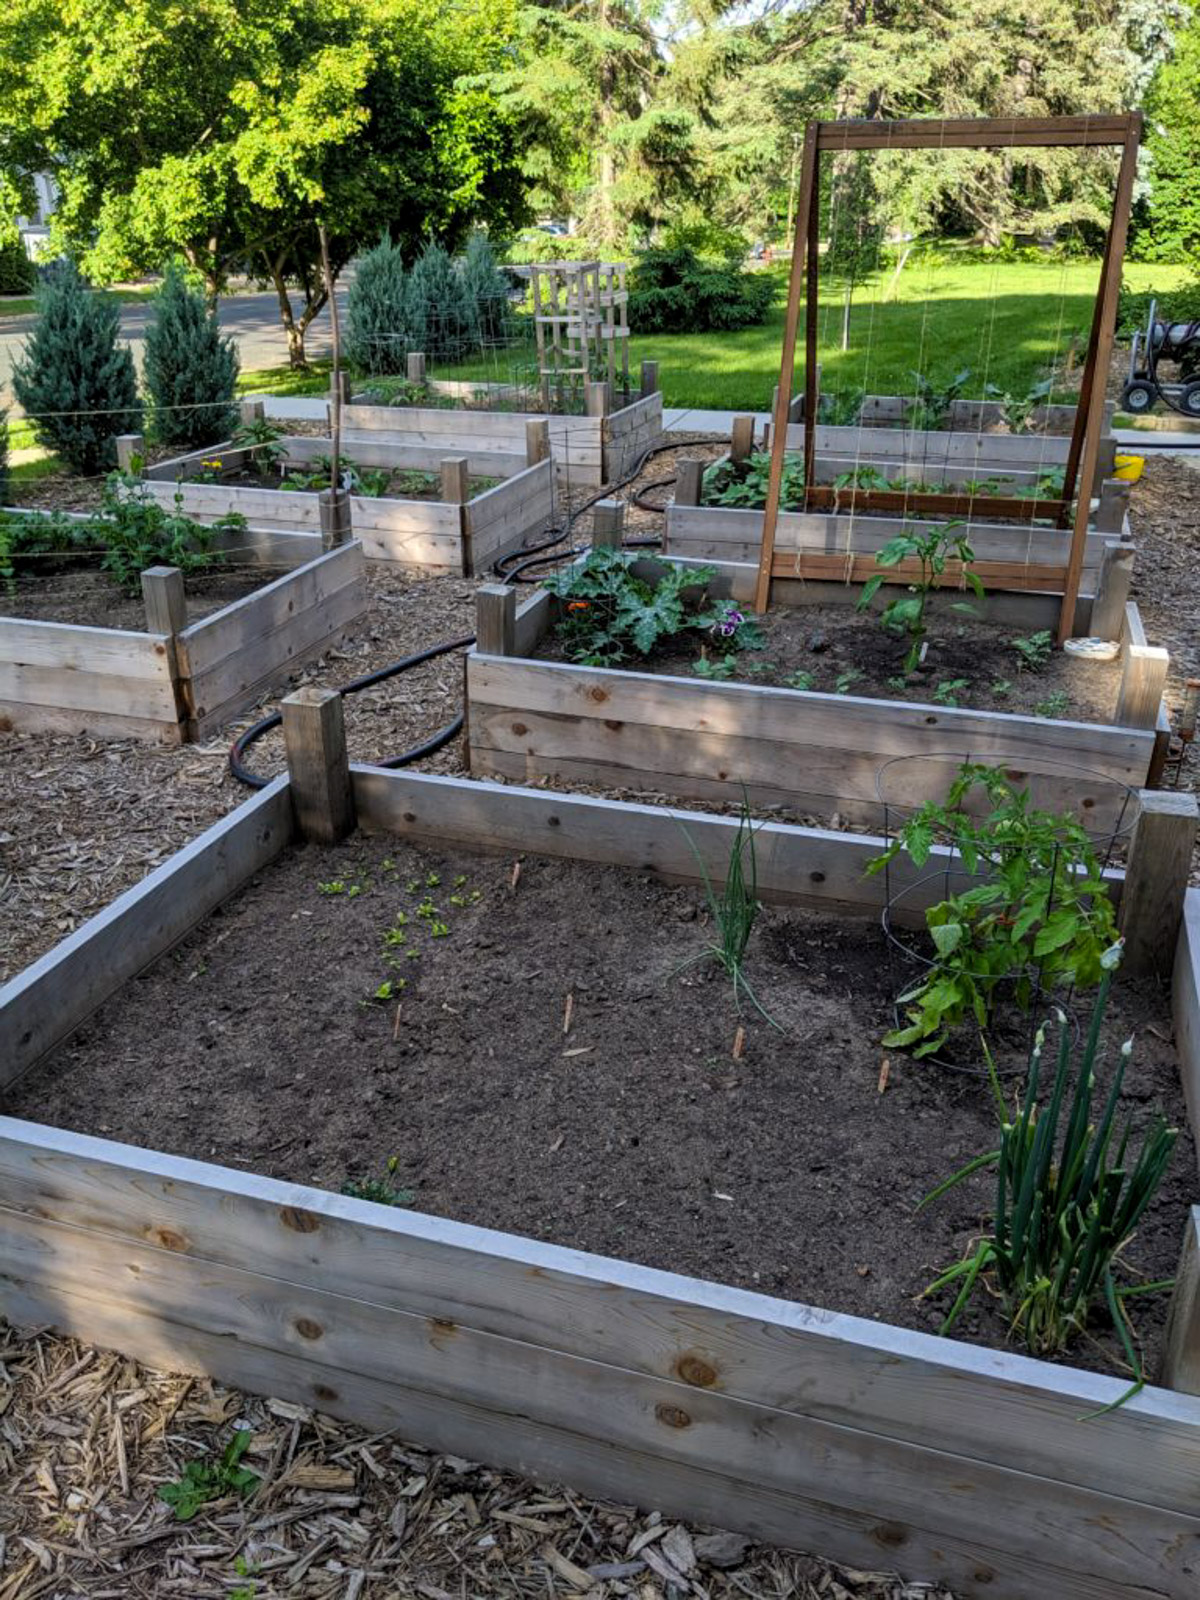 Raised bed vegetable gardens in June with a trellis for climbing plants.